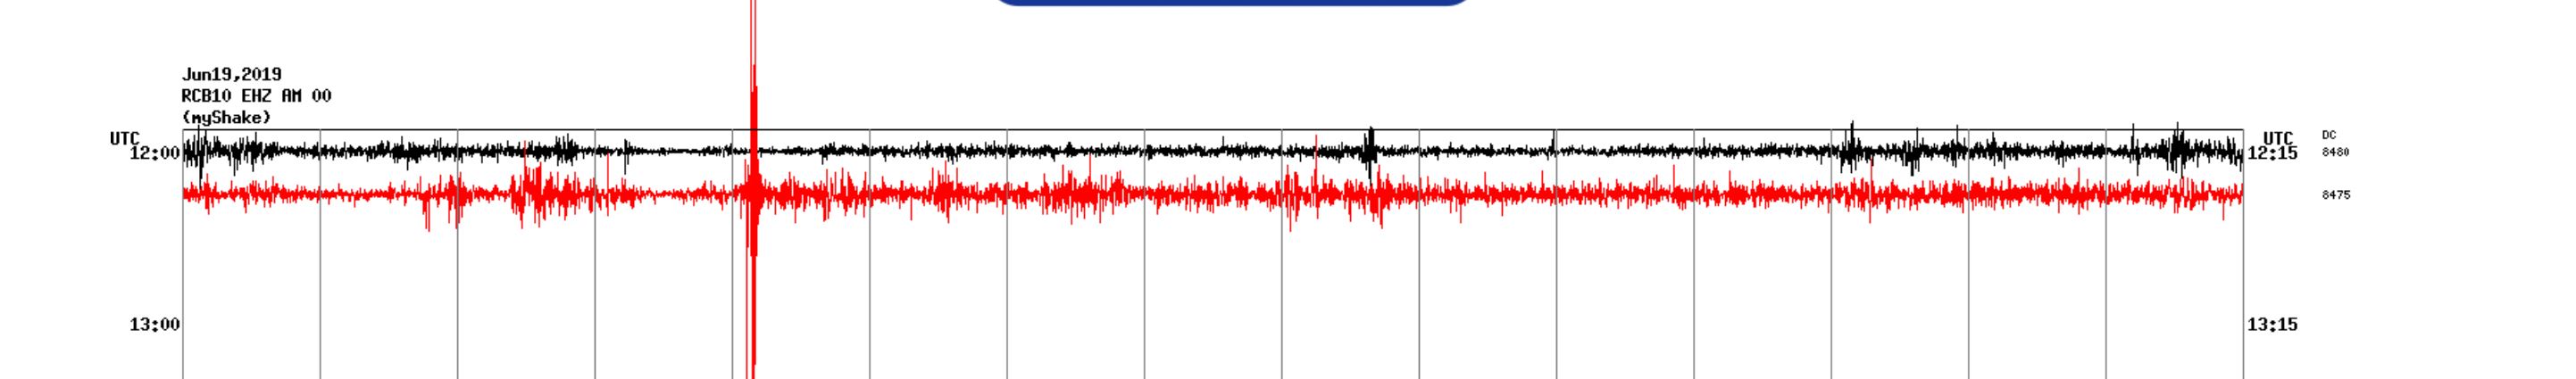 Yesterday's Seismographic reading from my basement